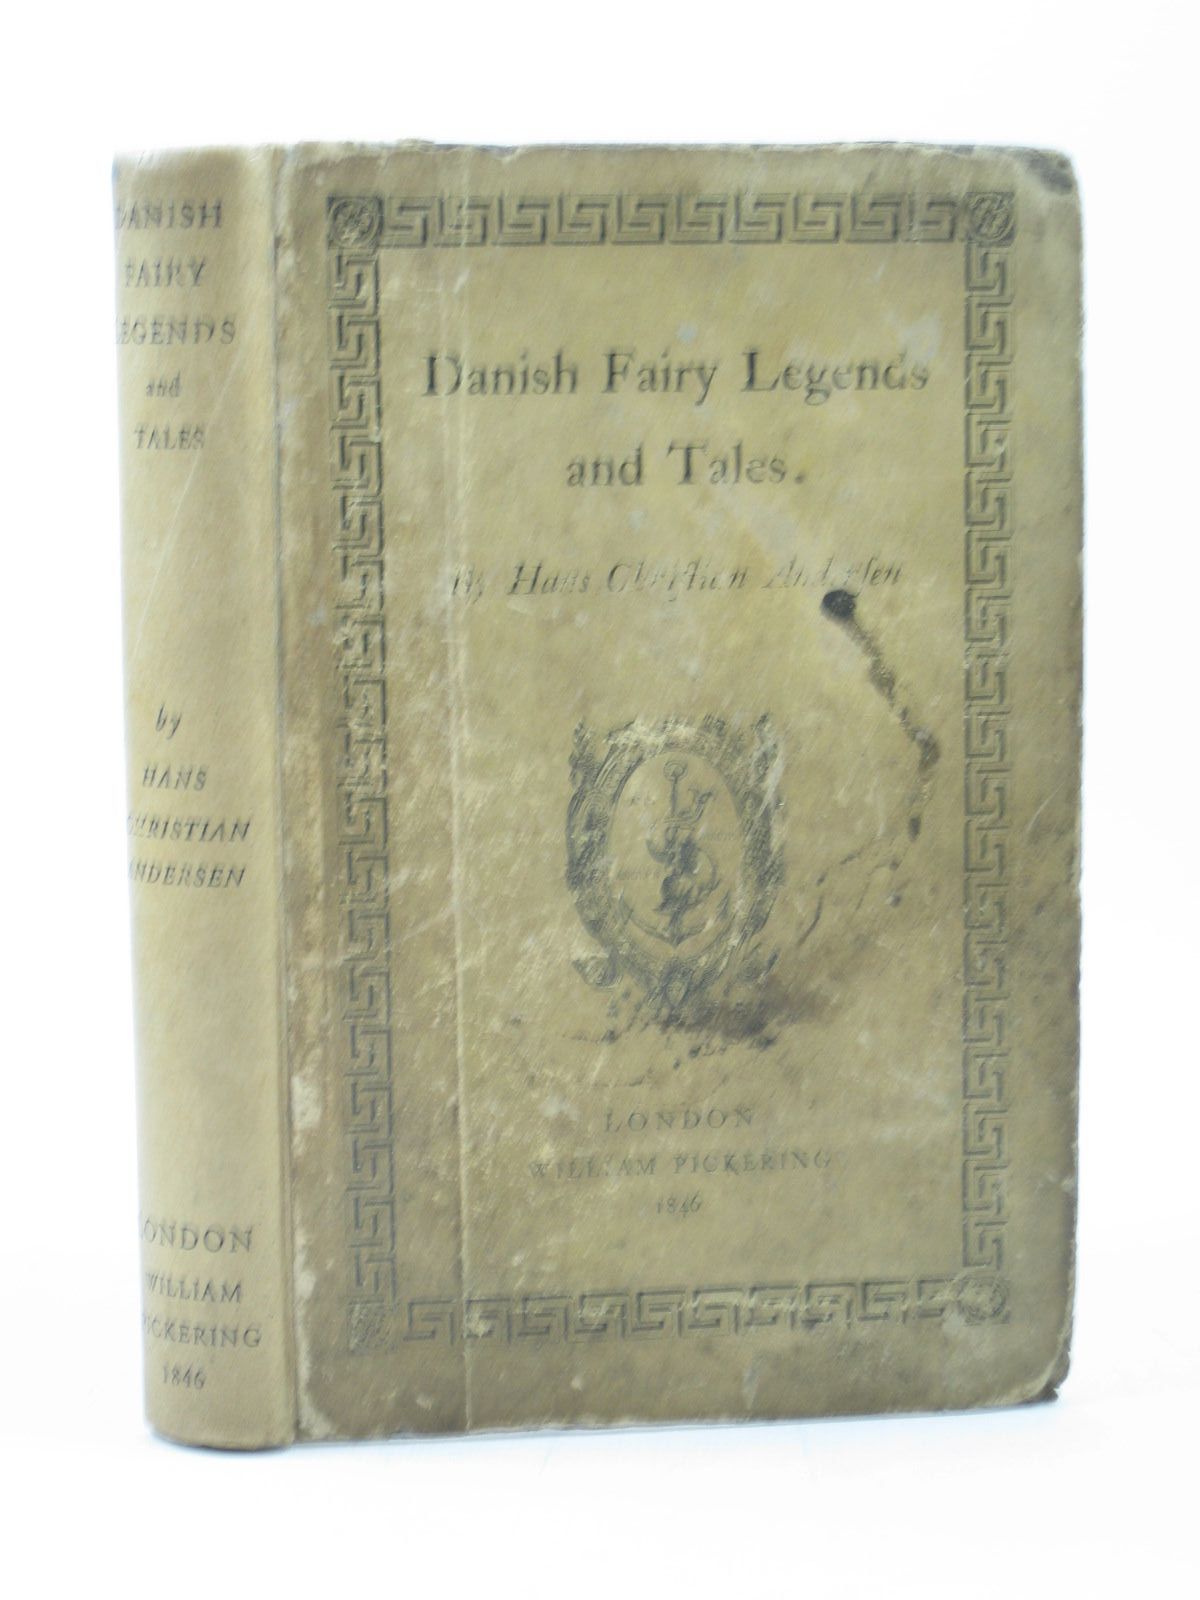 Cover of DANISH FAIRY LEGENDS AND TALES by Hans Christian Andersen